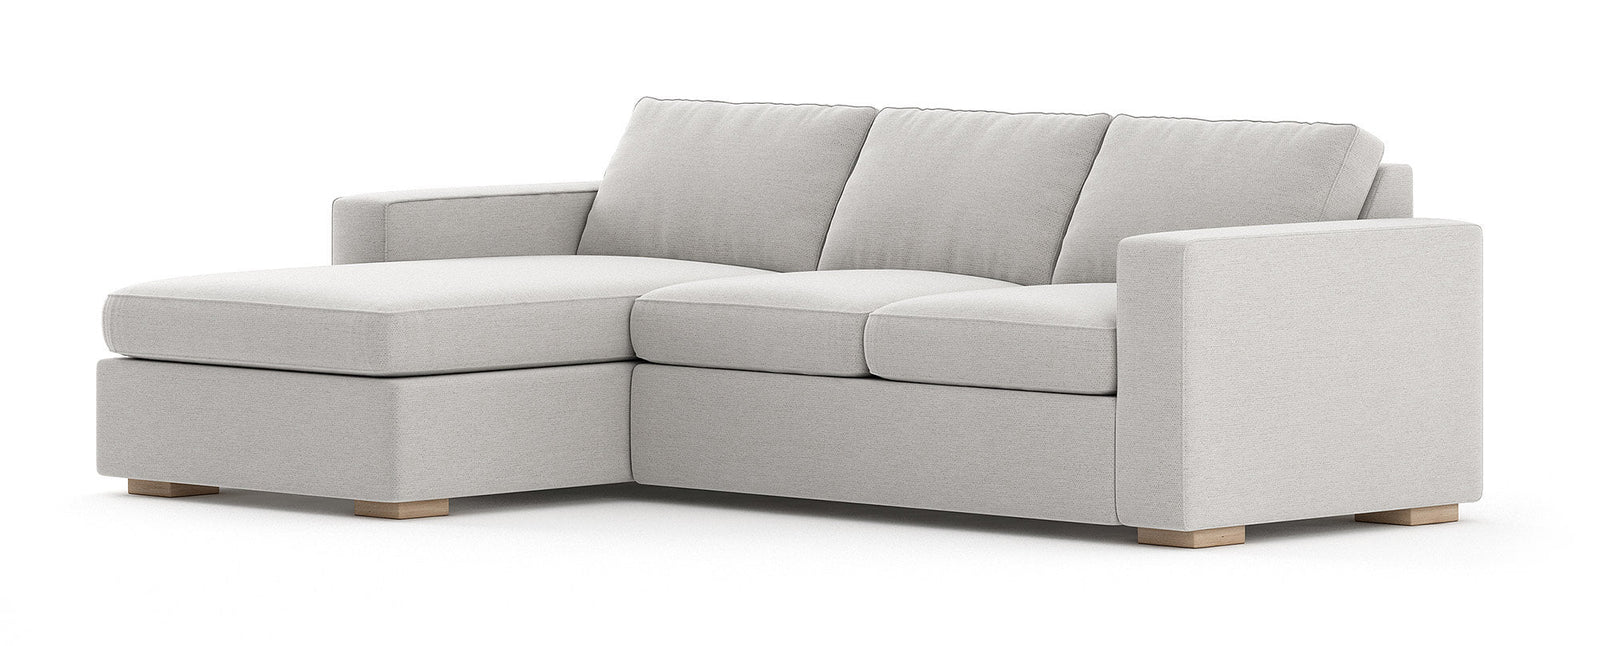 Rio Contemporary Chaise Sectional